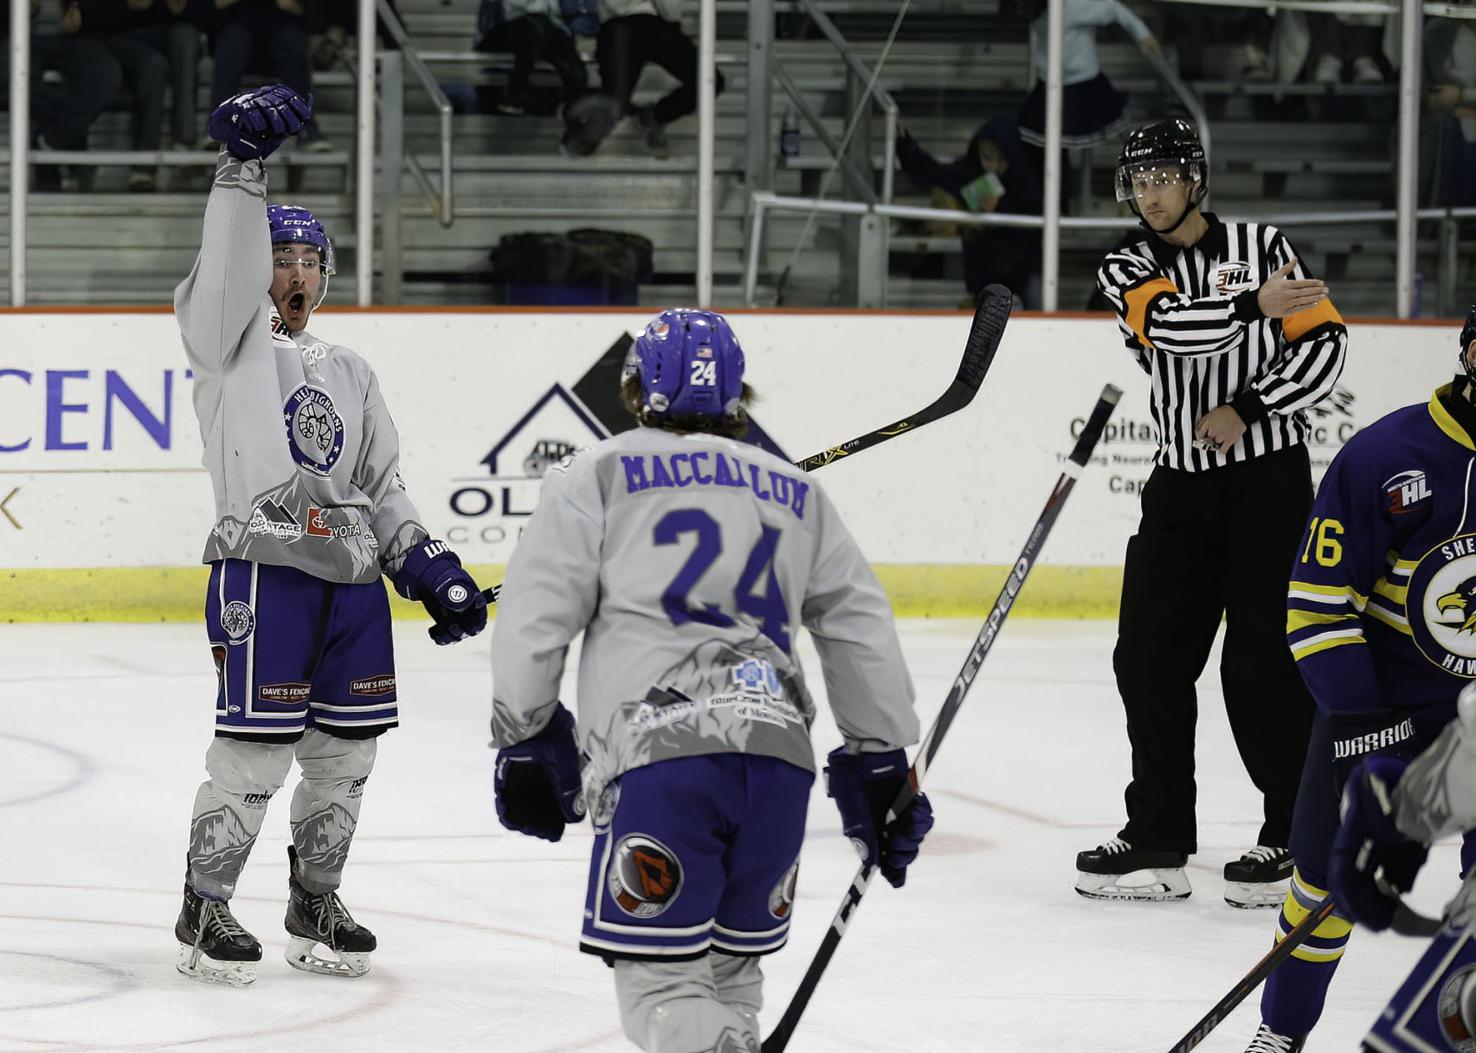 Helena Bighorns keep to their winning ways with 15goal victory